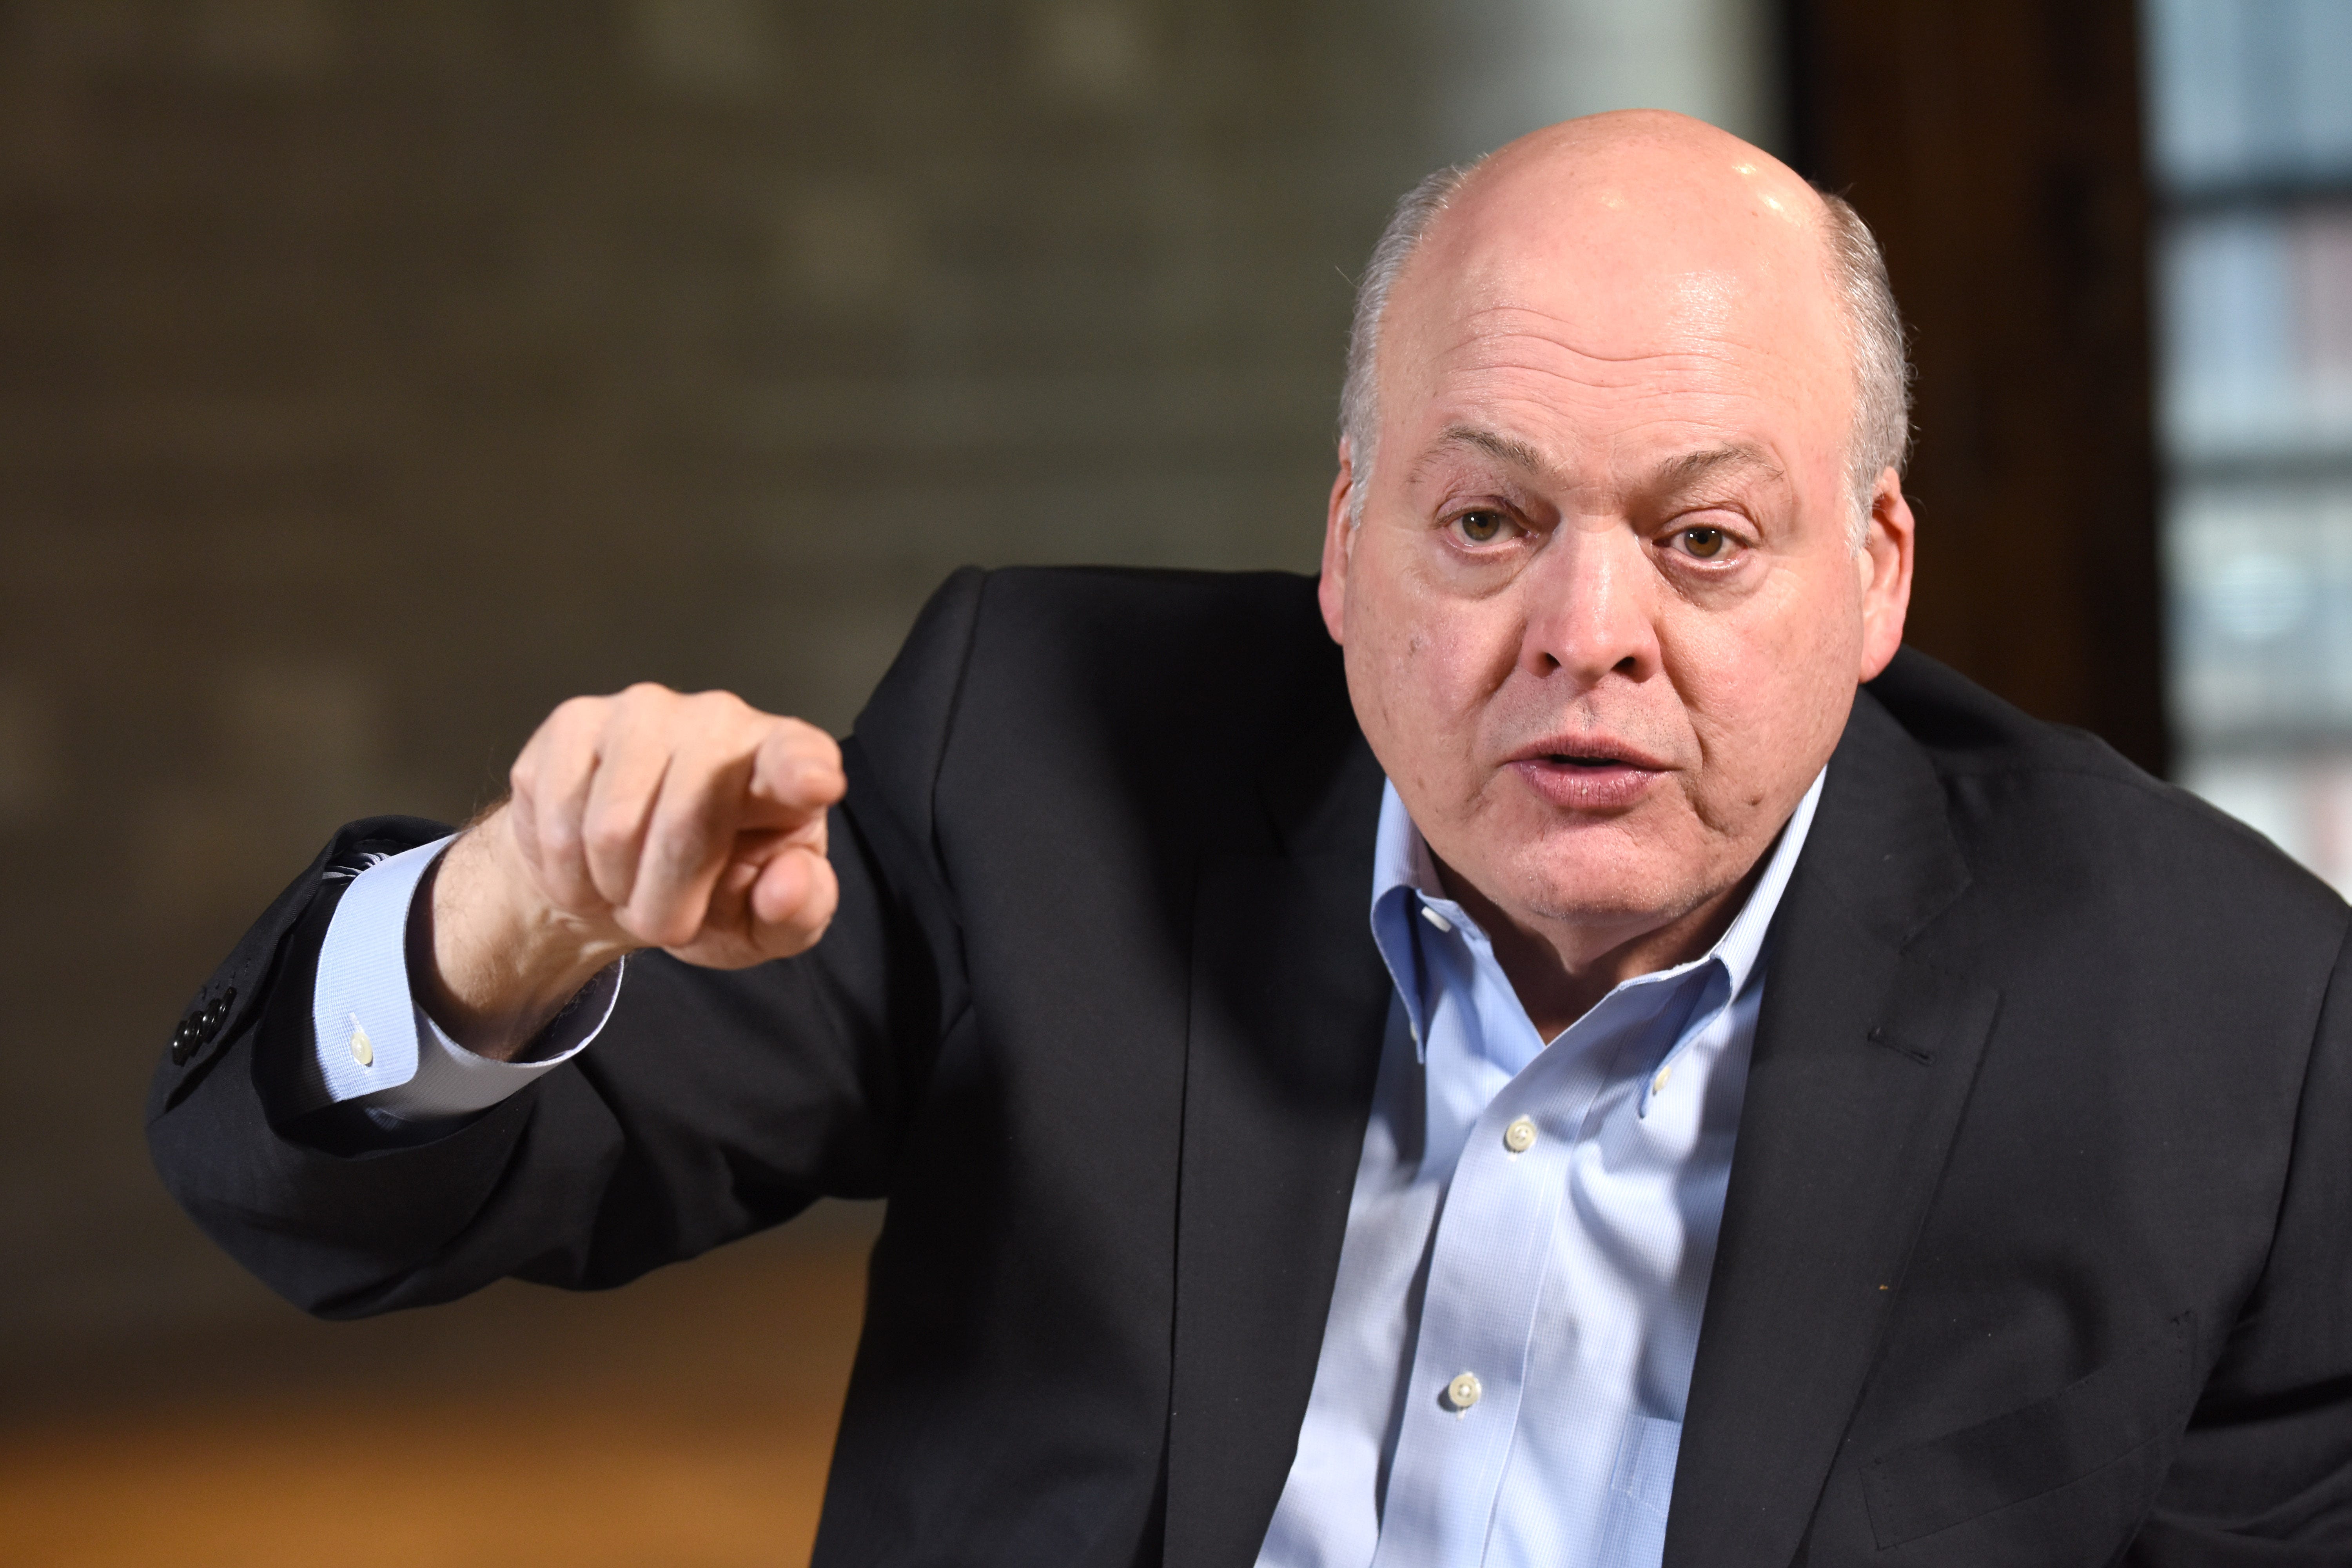 Ford CEO Jim Hackett speaks about his time at the company, how he feels his business plan is shaking out, and what he expects over the next year during an interview at Ford's The Factory at Corktown.